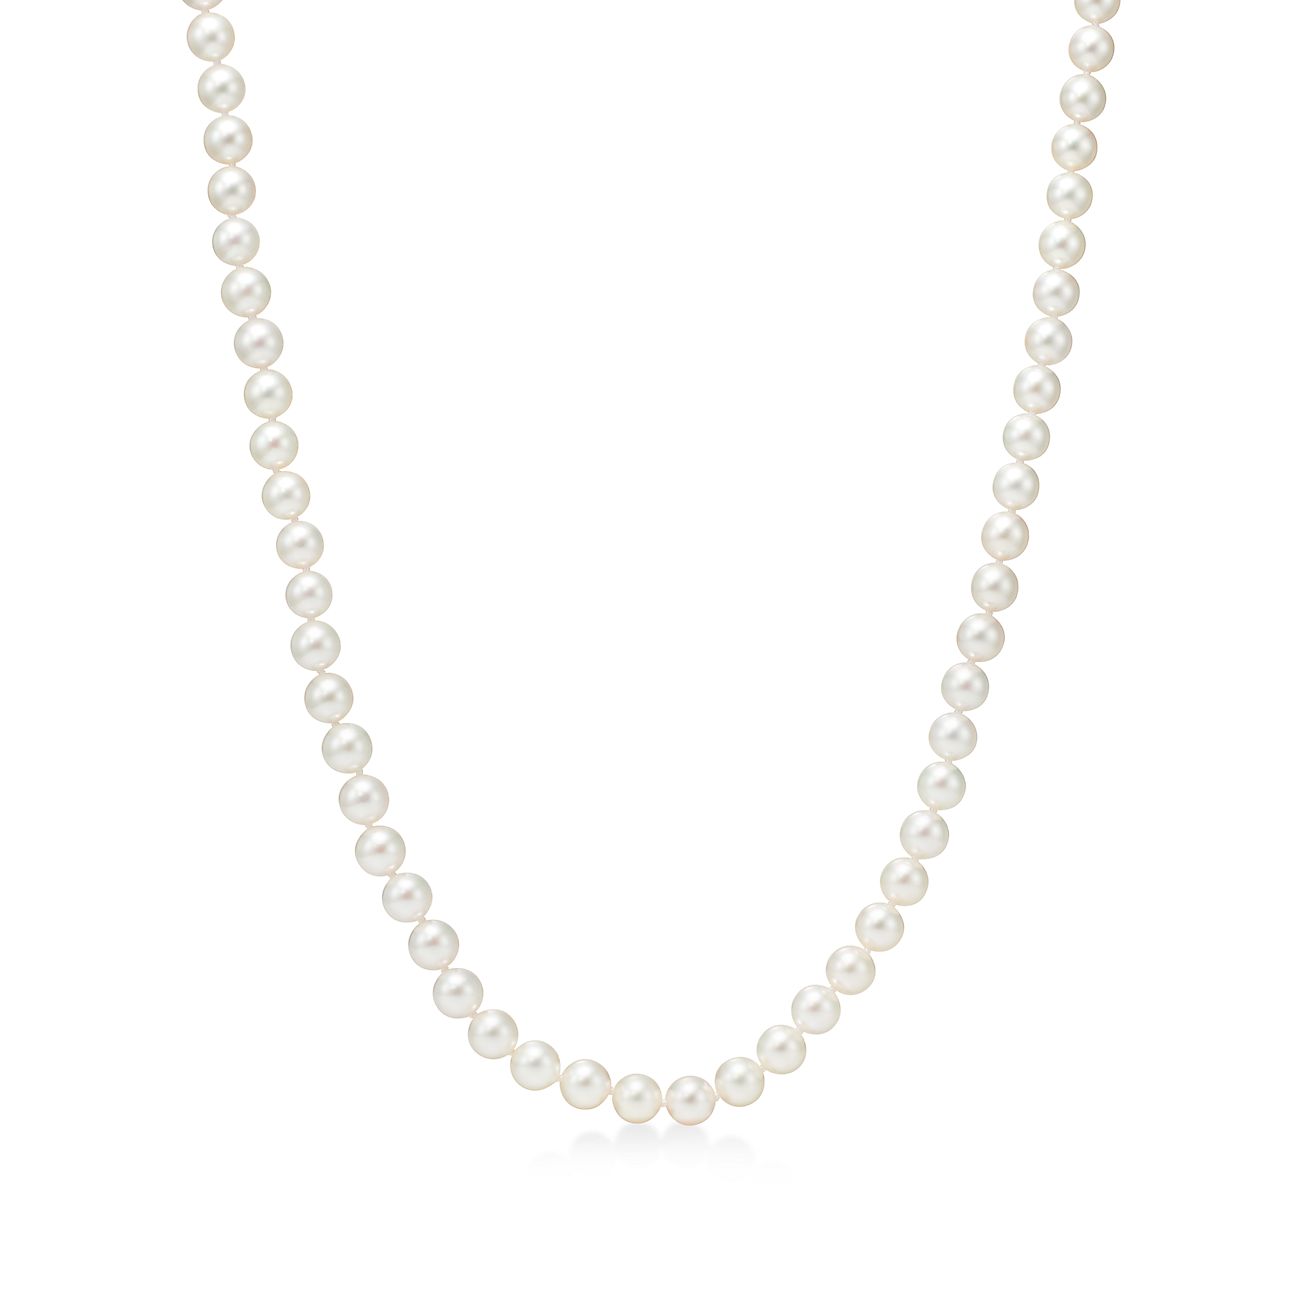 AA Cream Akoya Cultured 6.0 - 6.5mm Pearl Necklace 16